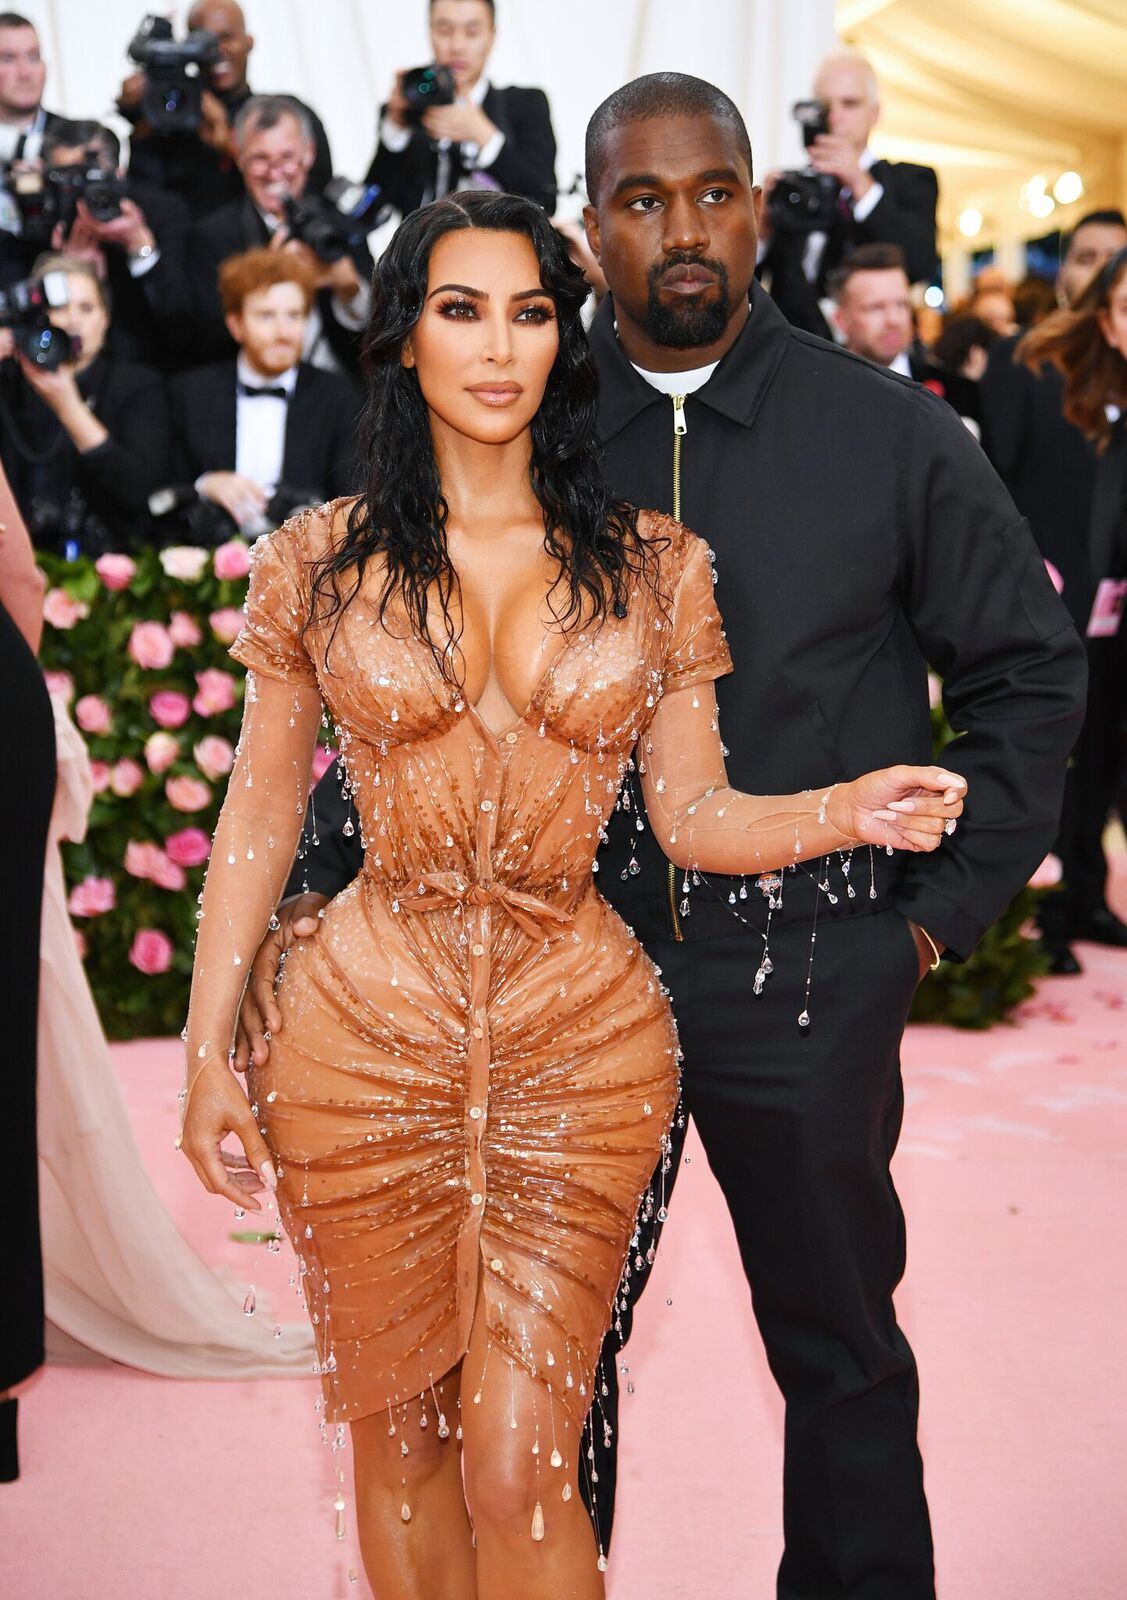 Kim Kardashian West and Kanye West attend The 2019 Met Gala Celebrating Camp: Notes on Fashion at Metropolitan Museum of Art on May 06, 2019 in New York City | Photo: Getty Images